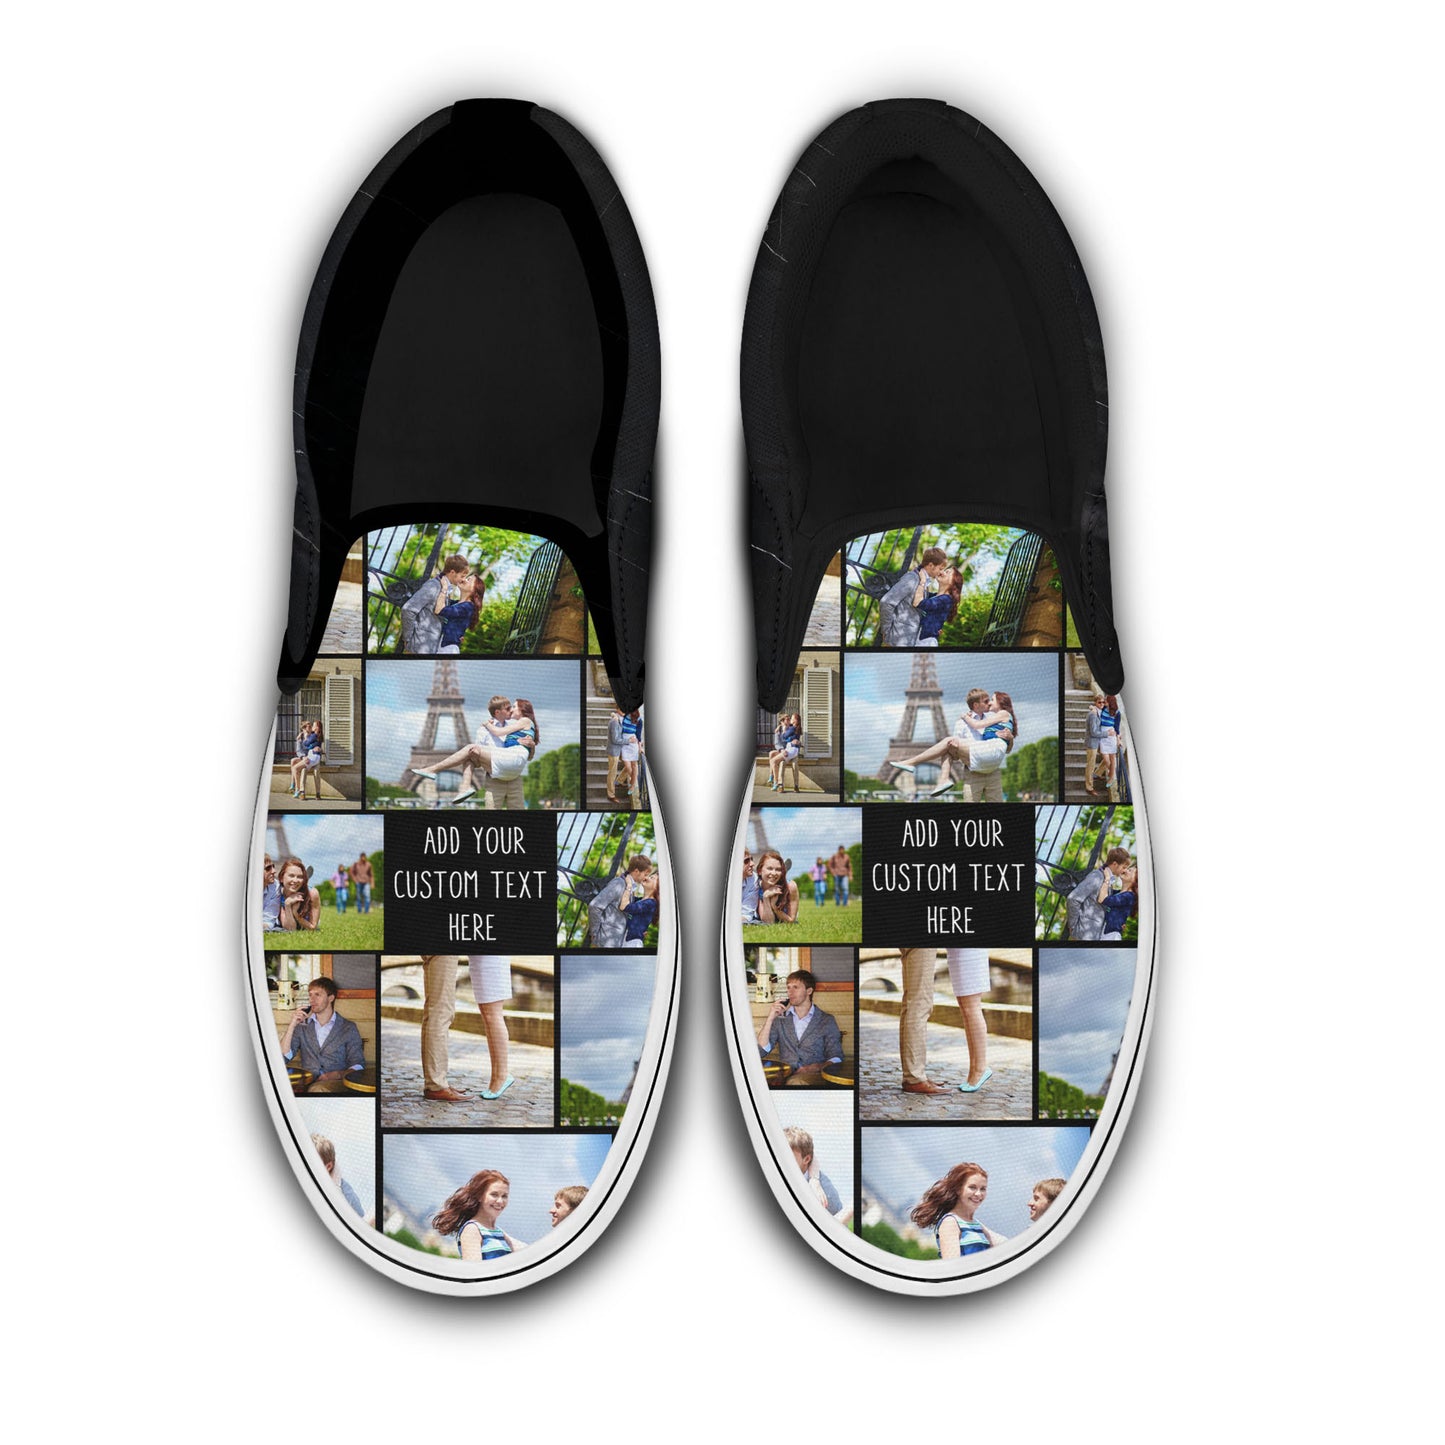 Slip-on Shoes with Collage Photo, Collage Photo on Slip Personalized Shoes